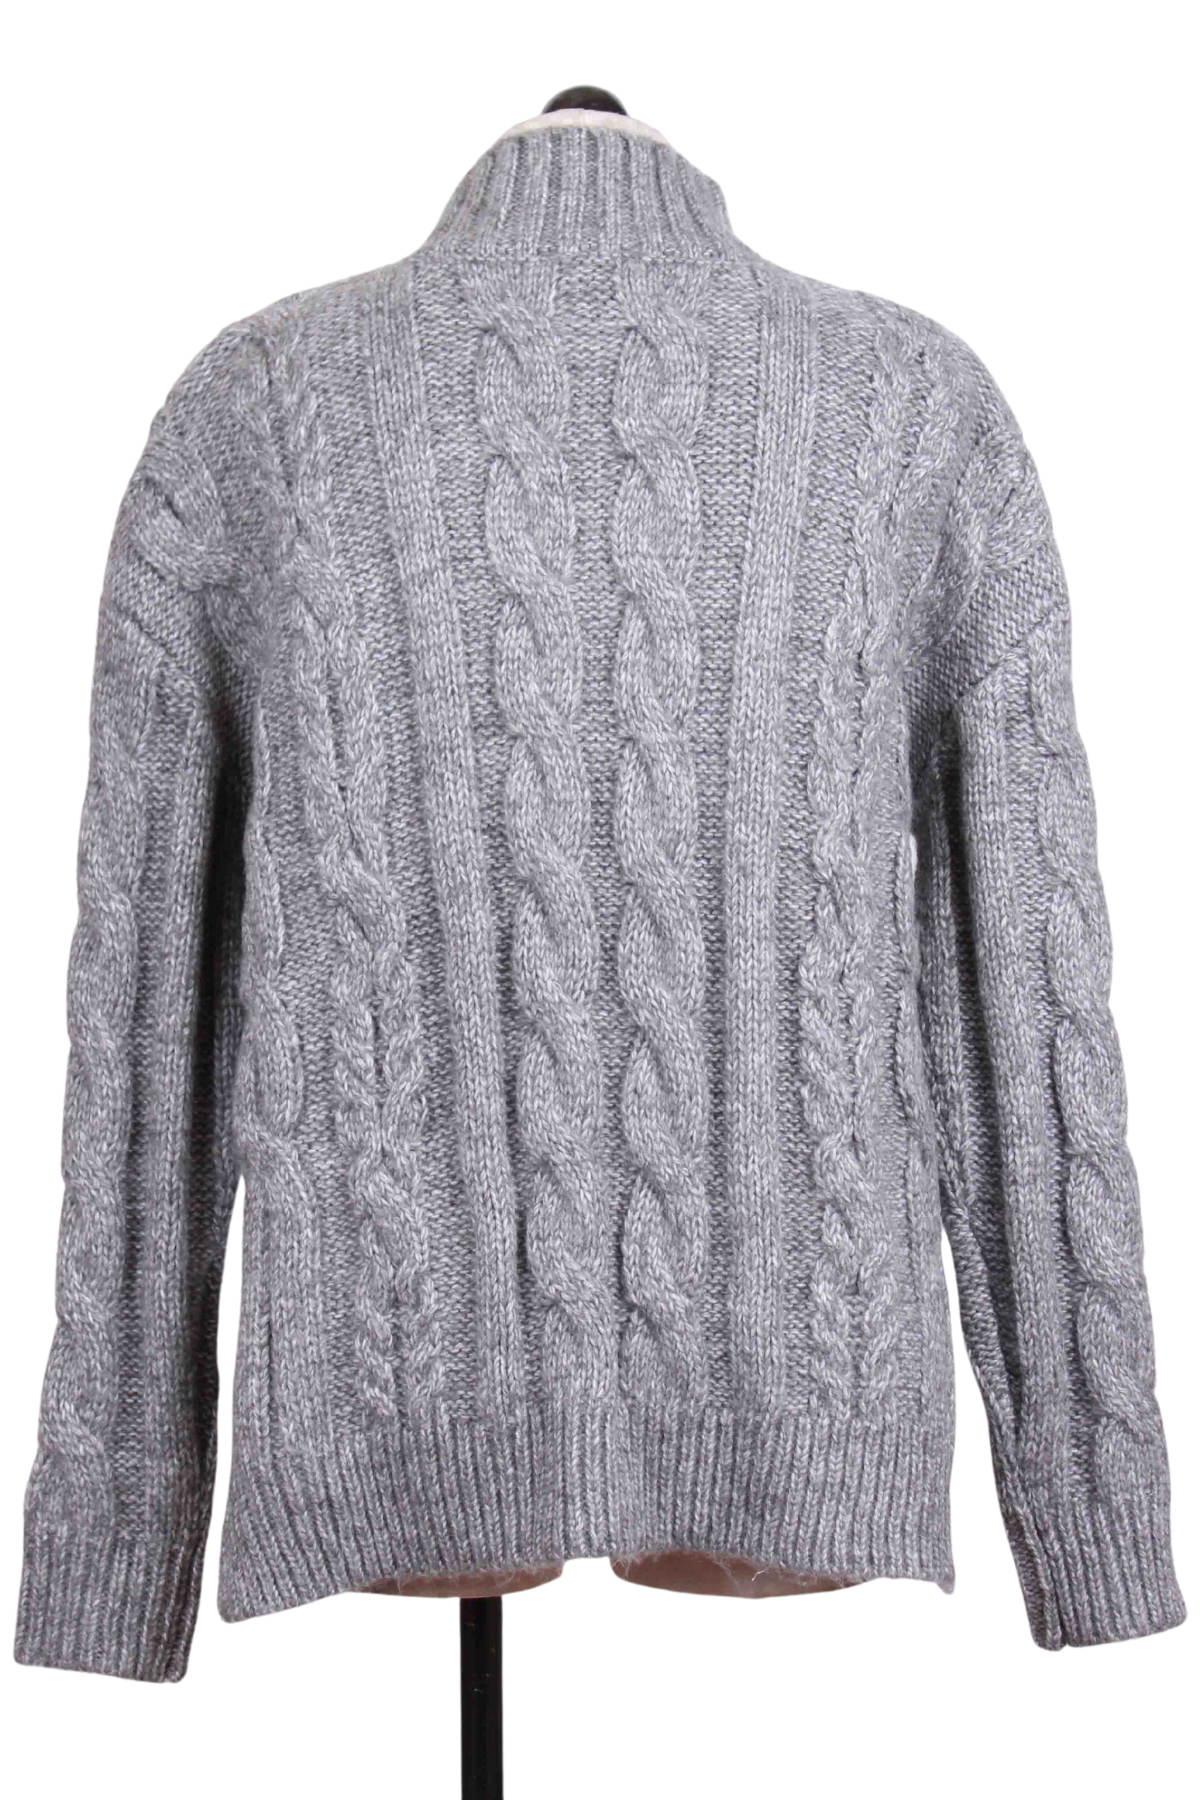 back view of Gray Turtleneck Cable Sweater by Fifteen Twenty